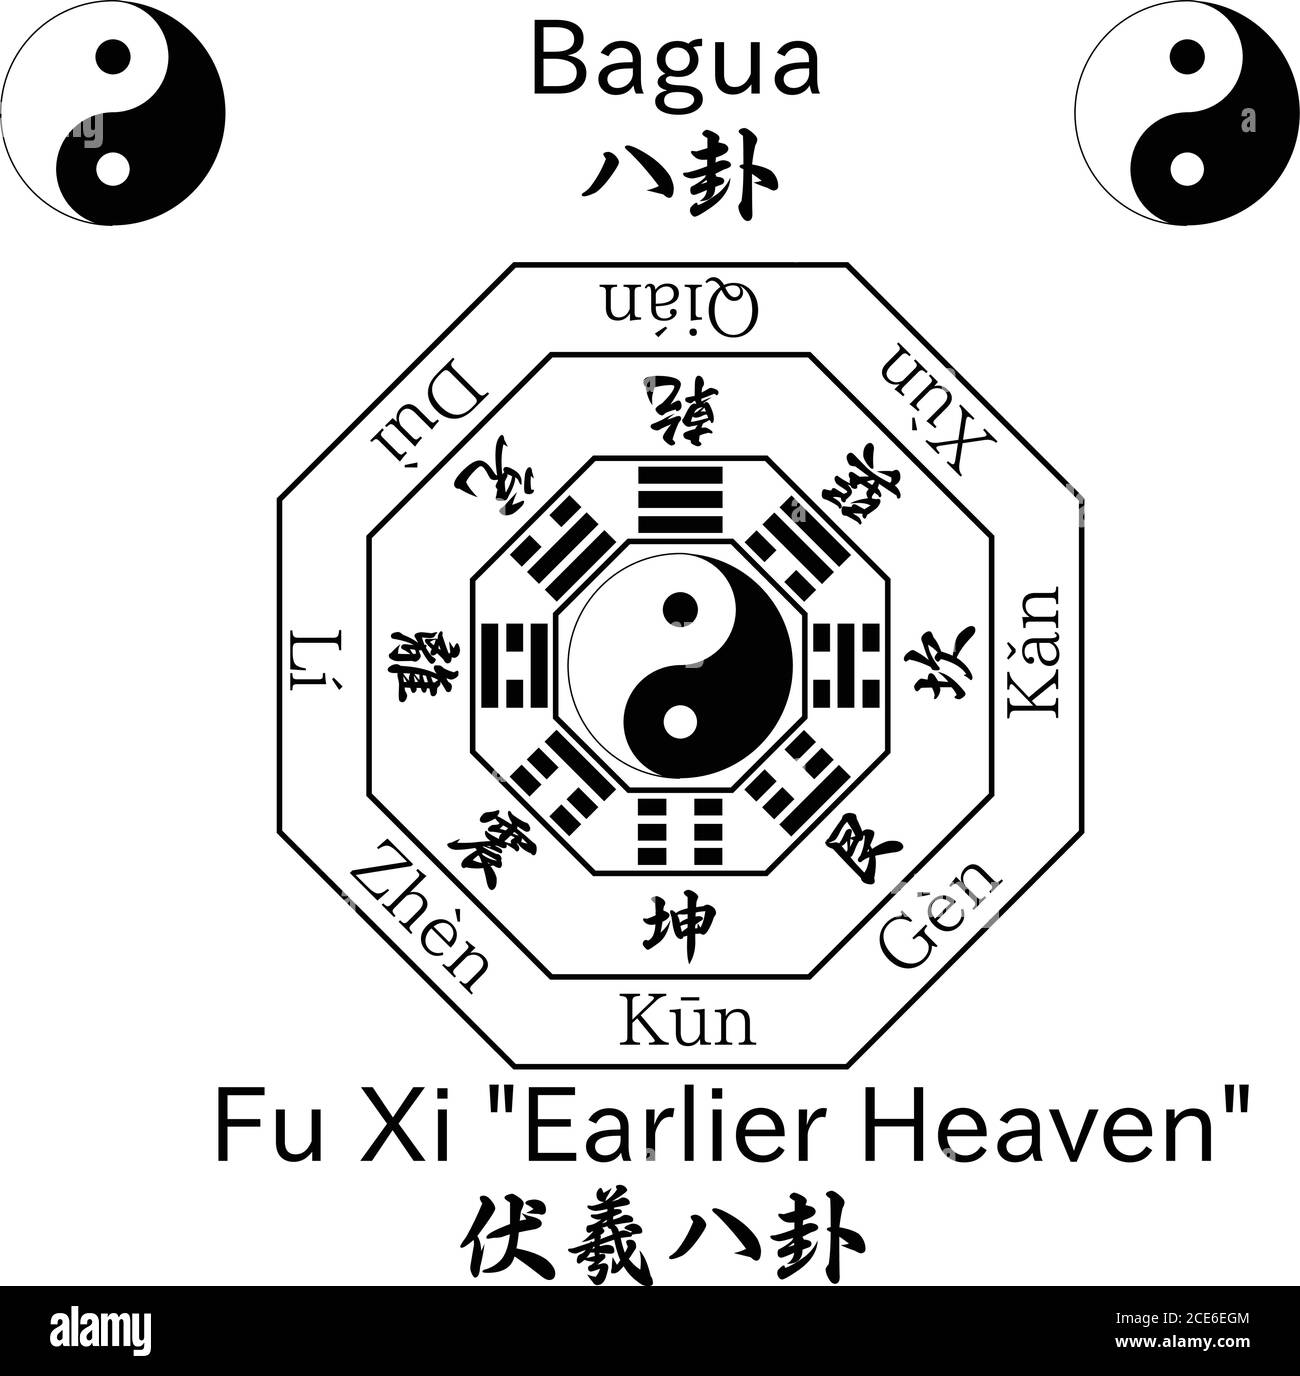 Yin and yang 'Fuxi Earlier Heaven' symbol with Bagua Trigrams. Vector graphic. Stock Vector